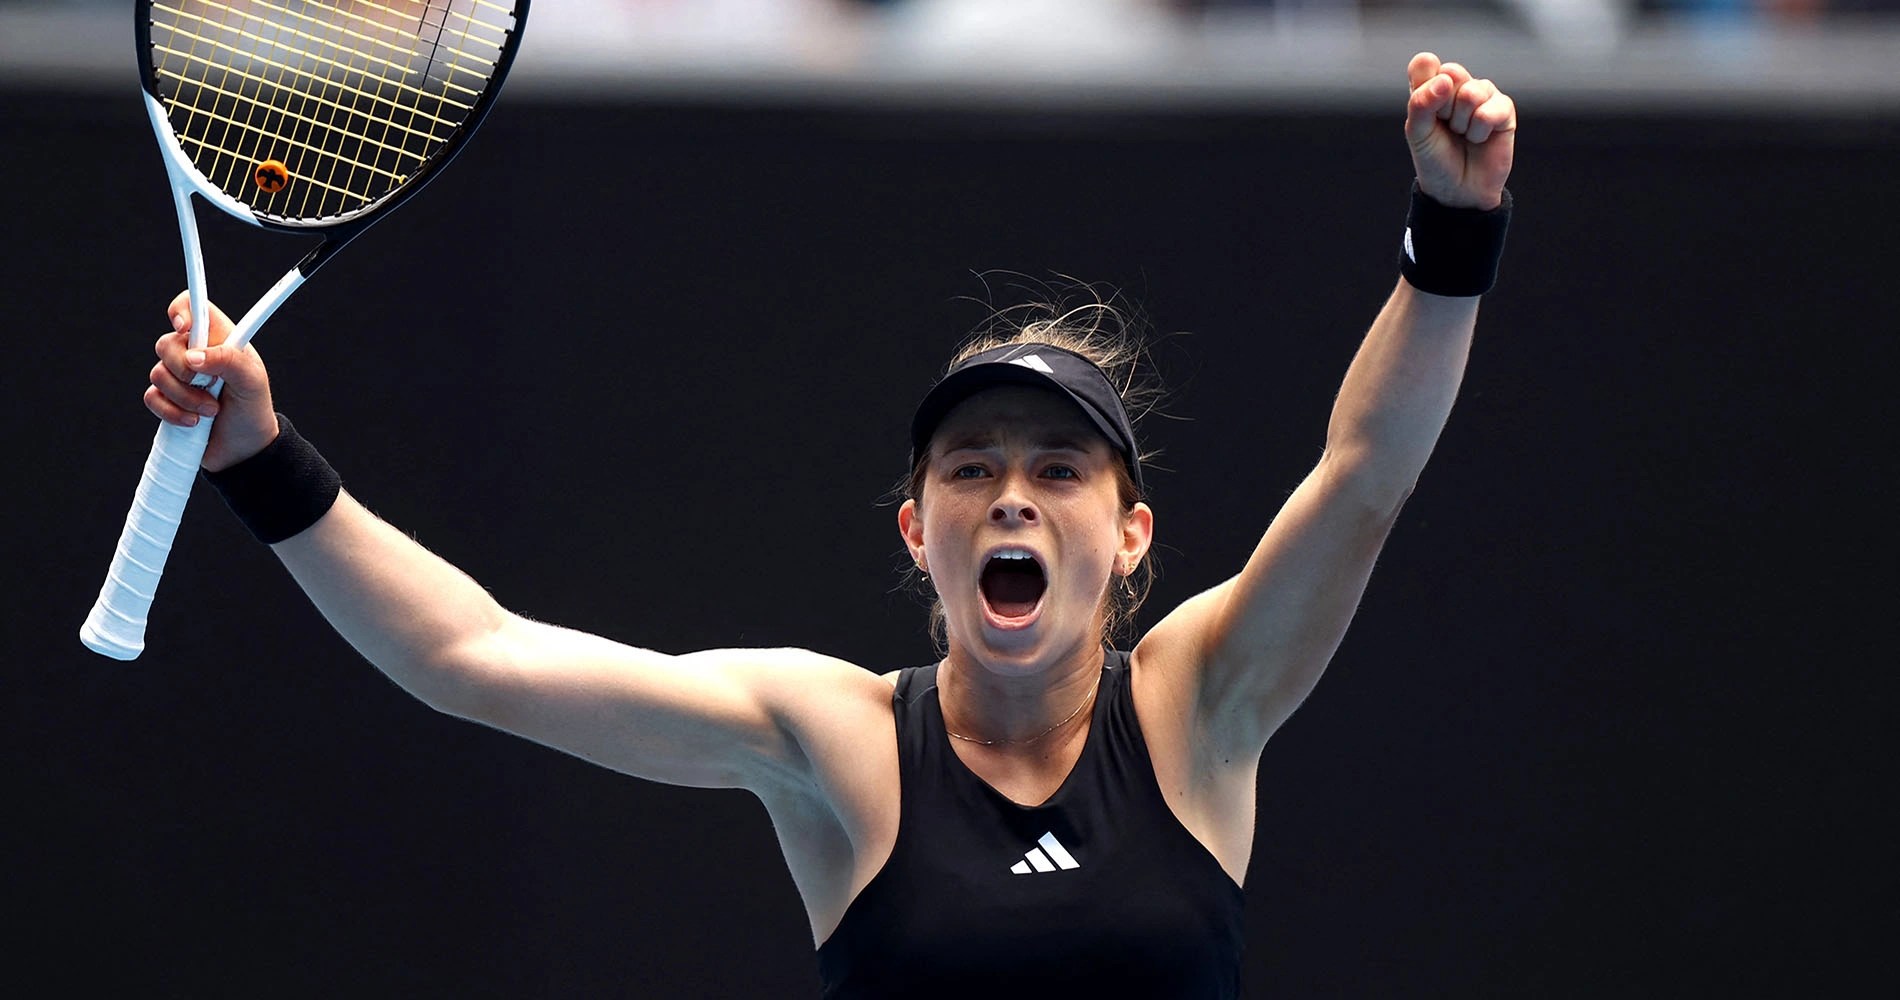 Australian Open Results: Qualifier Katie Volynets causes BIG UPSET, stuns ninth seed Veronika Kudermetova to reach third round - Check out